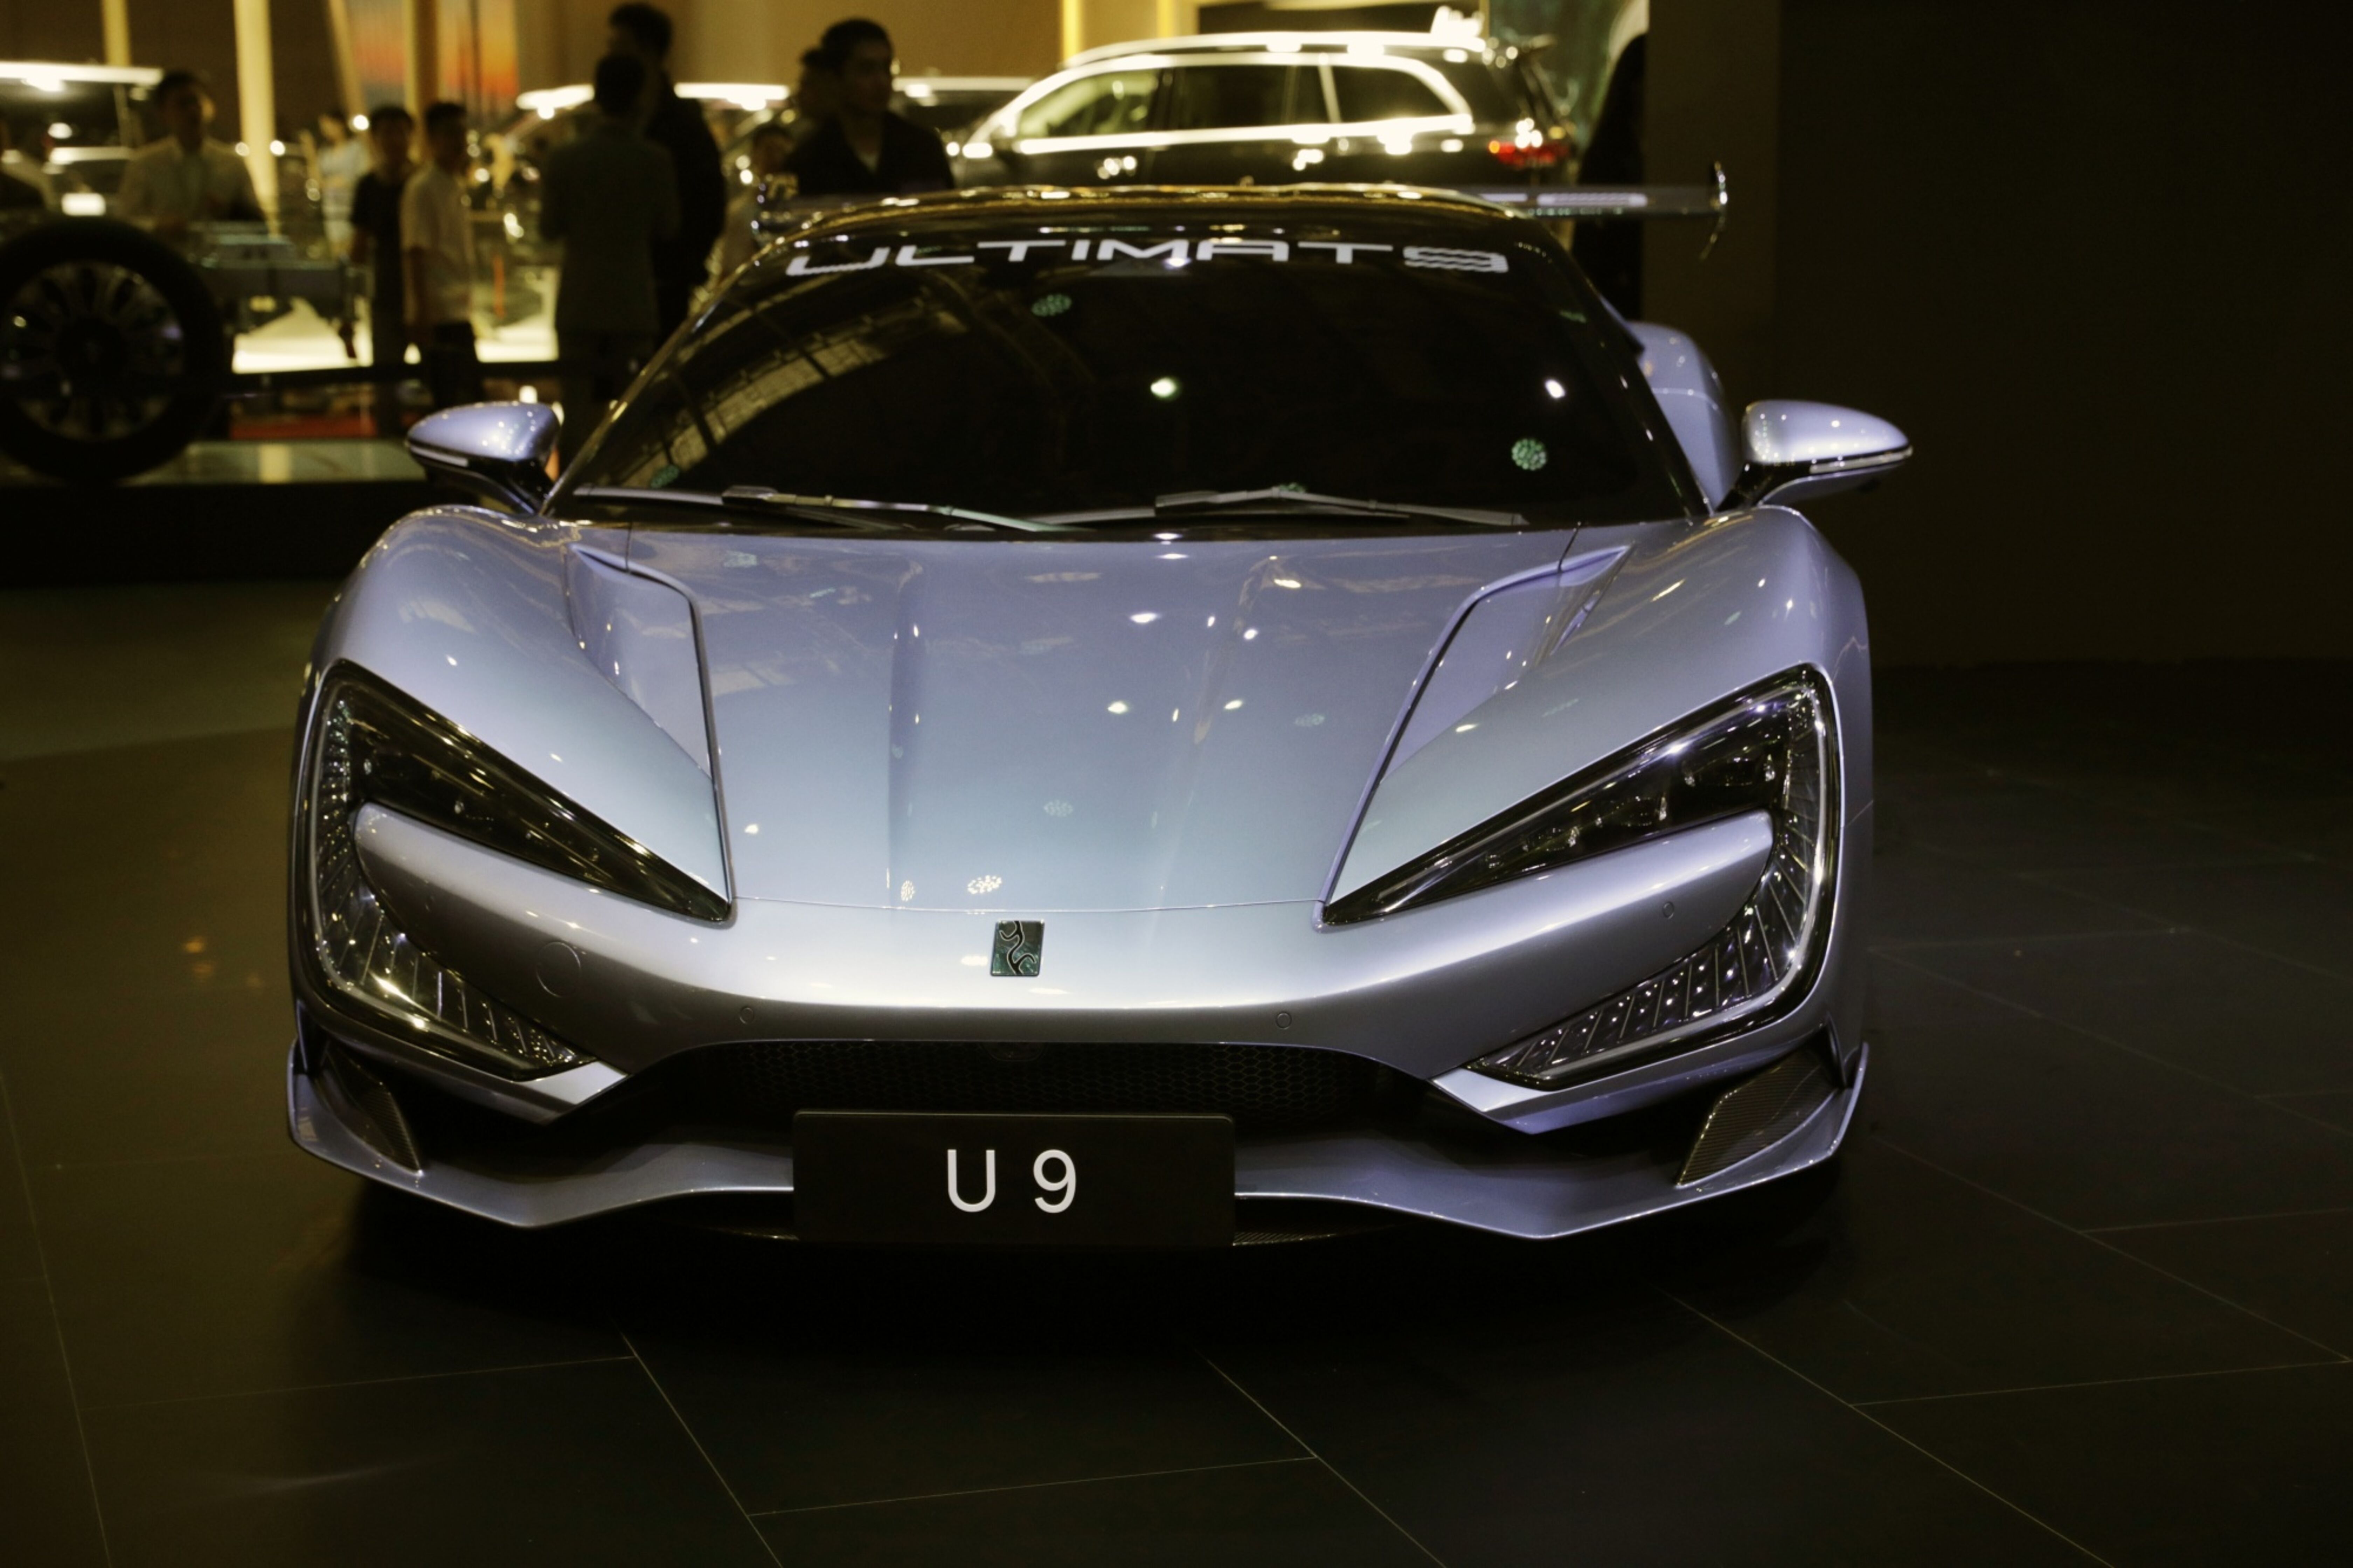 The fully electric U9 can hit 100 kph (62 mph) in 2.36 seconds. Photo: Bloomberg